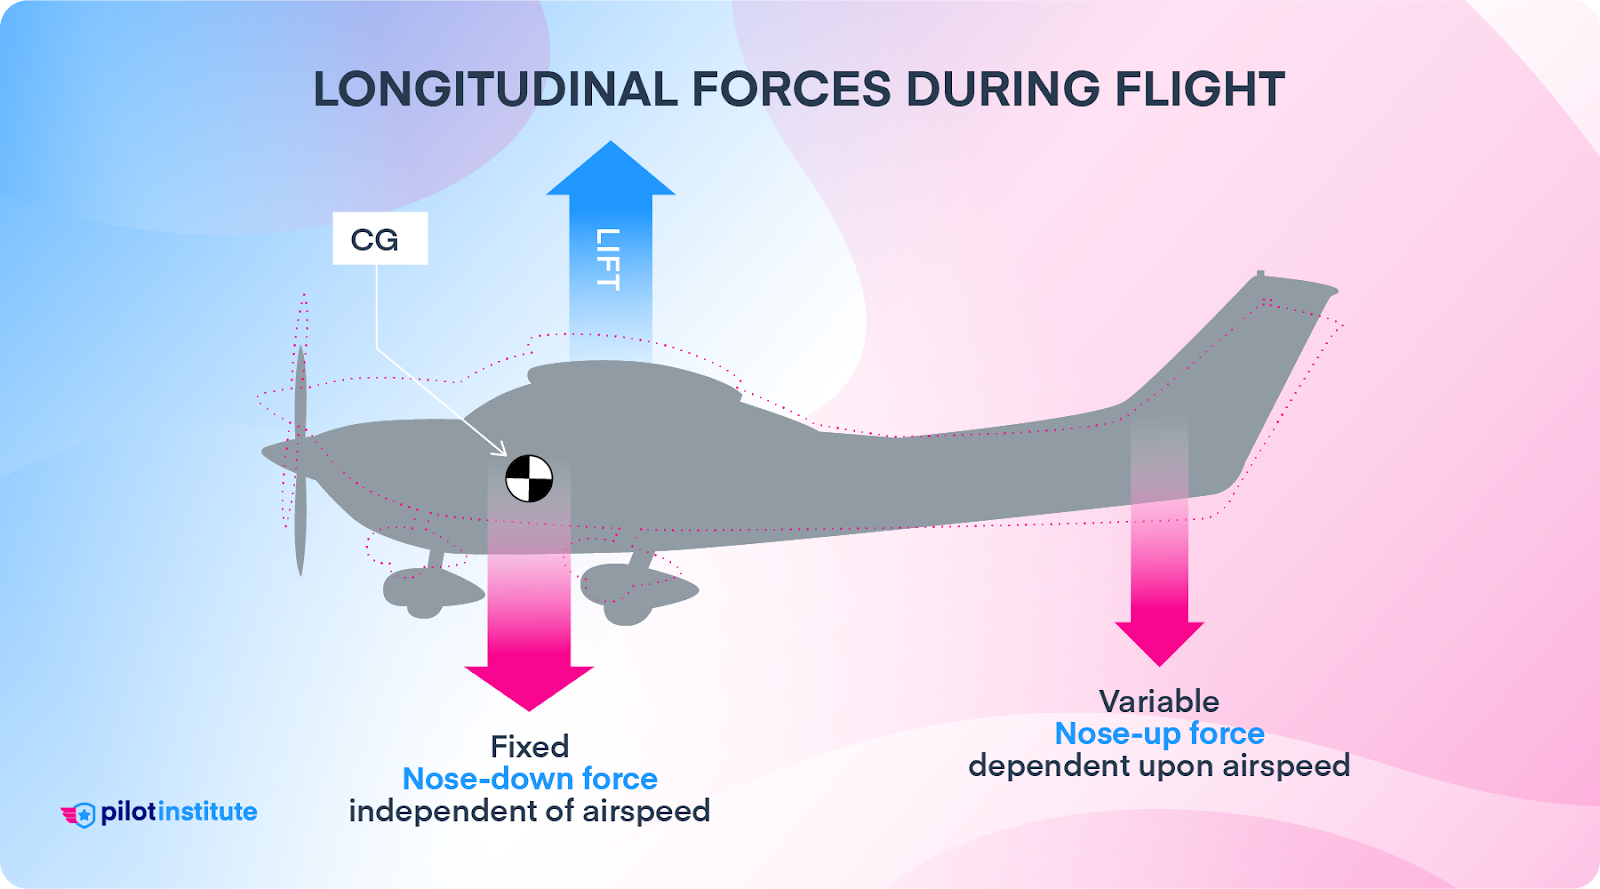 The longitudinal forces during flight, including CG, lift, and tail nose-up force.